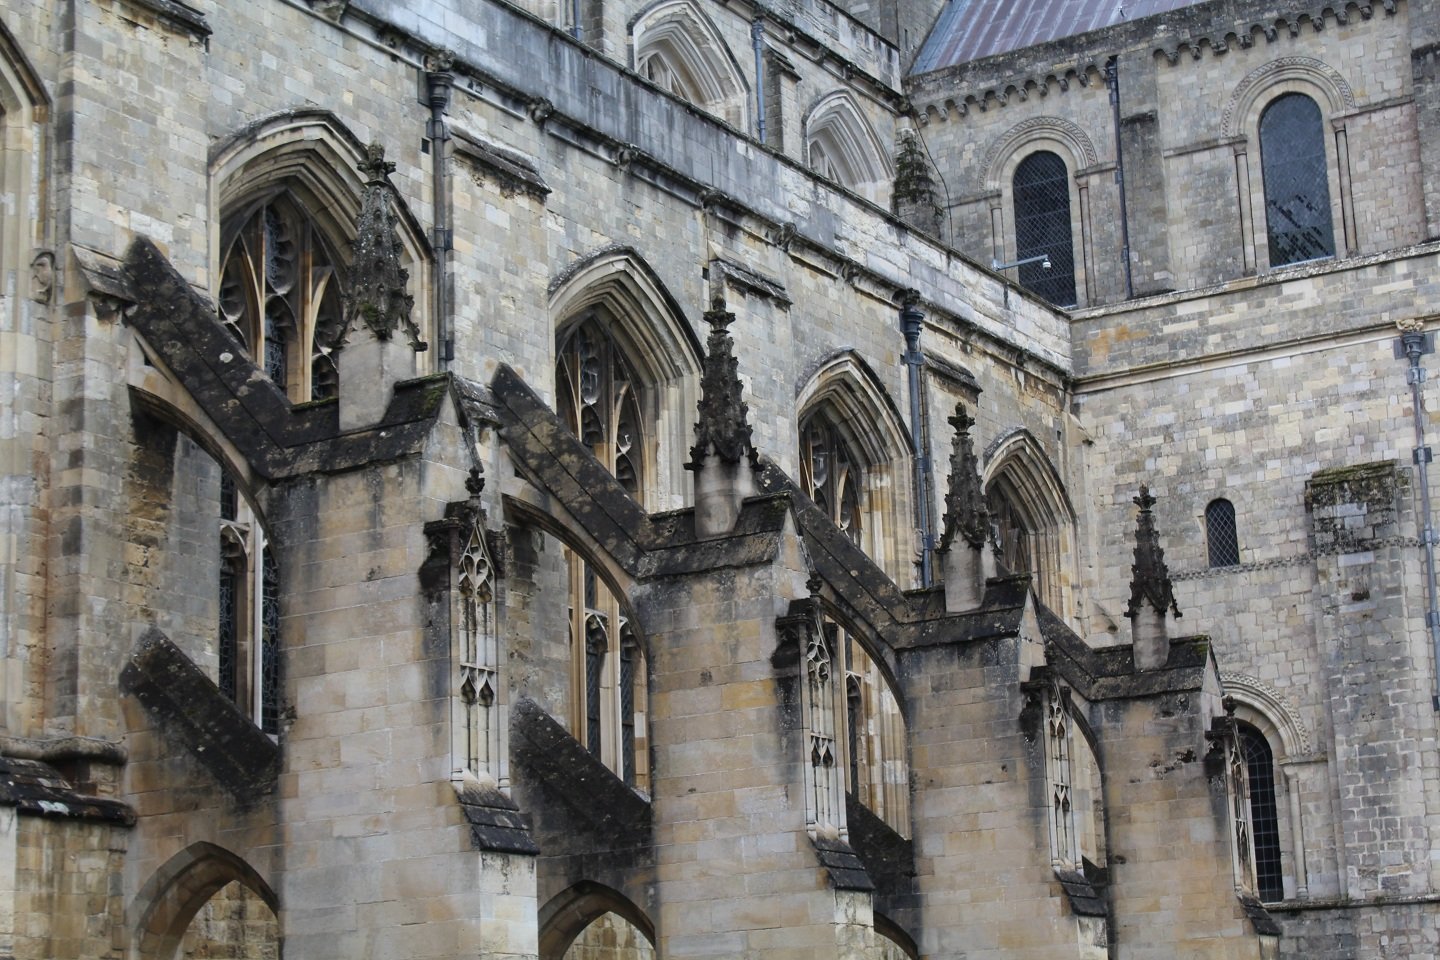 A view of the South side of Winchester Cathedral showing detail of the stonework